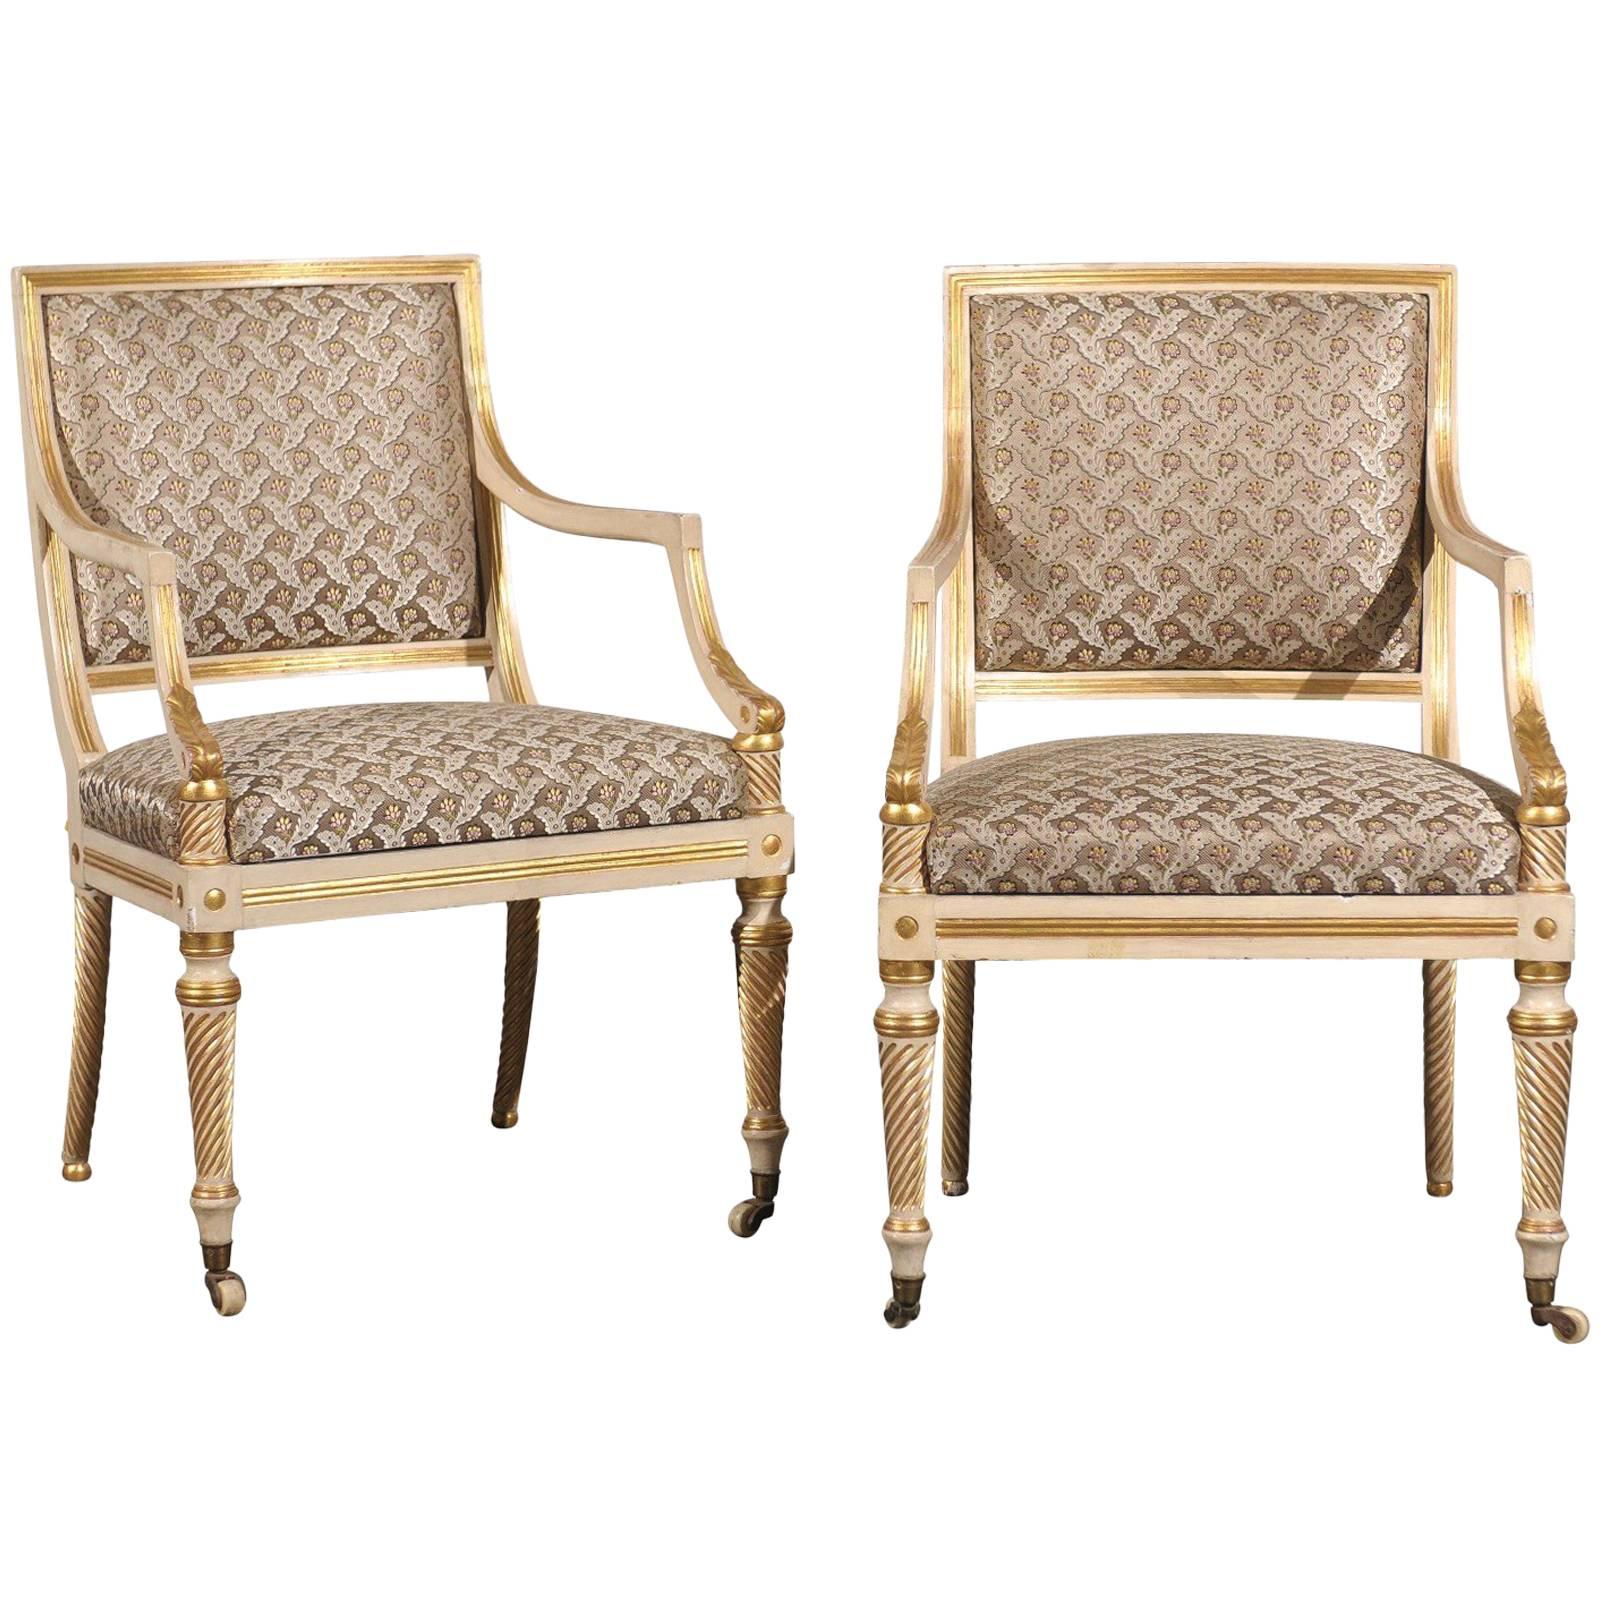 Pair of 19th Century Regency Style Painted & Giltwood Arm Chairs